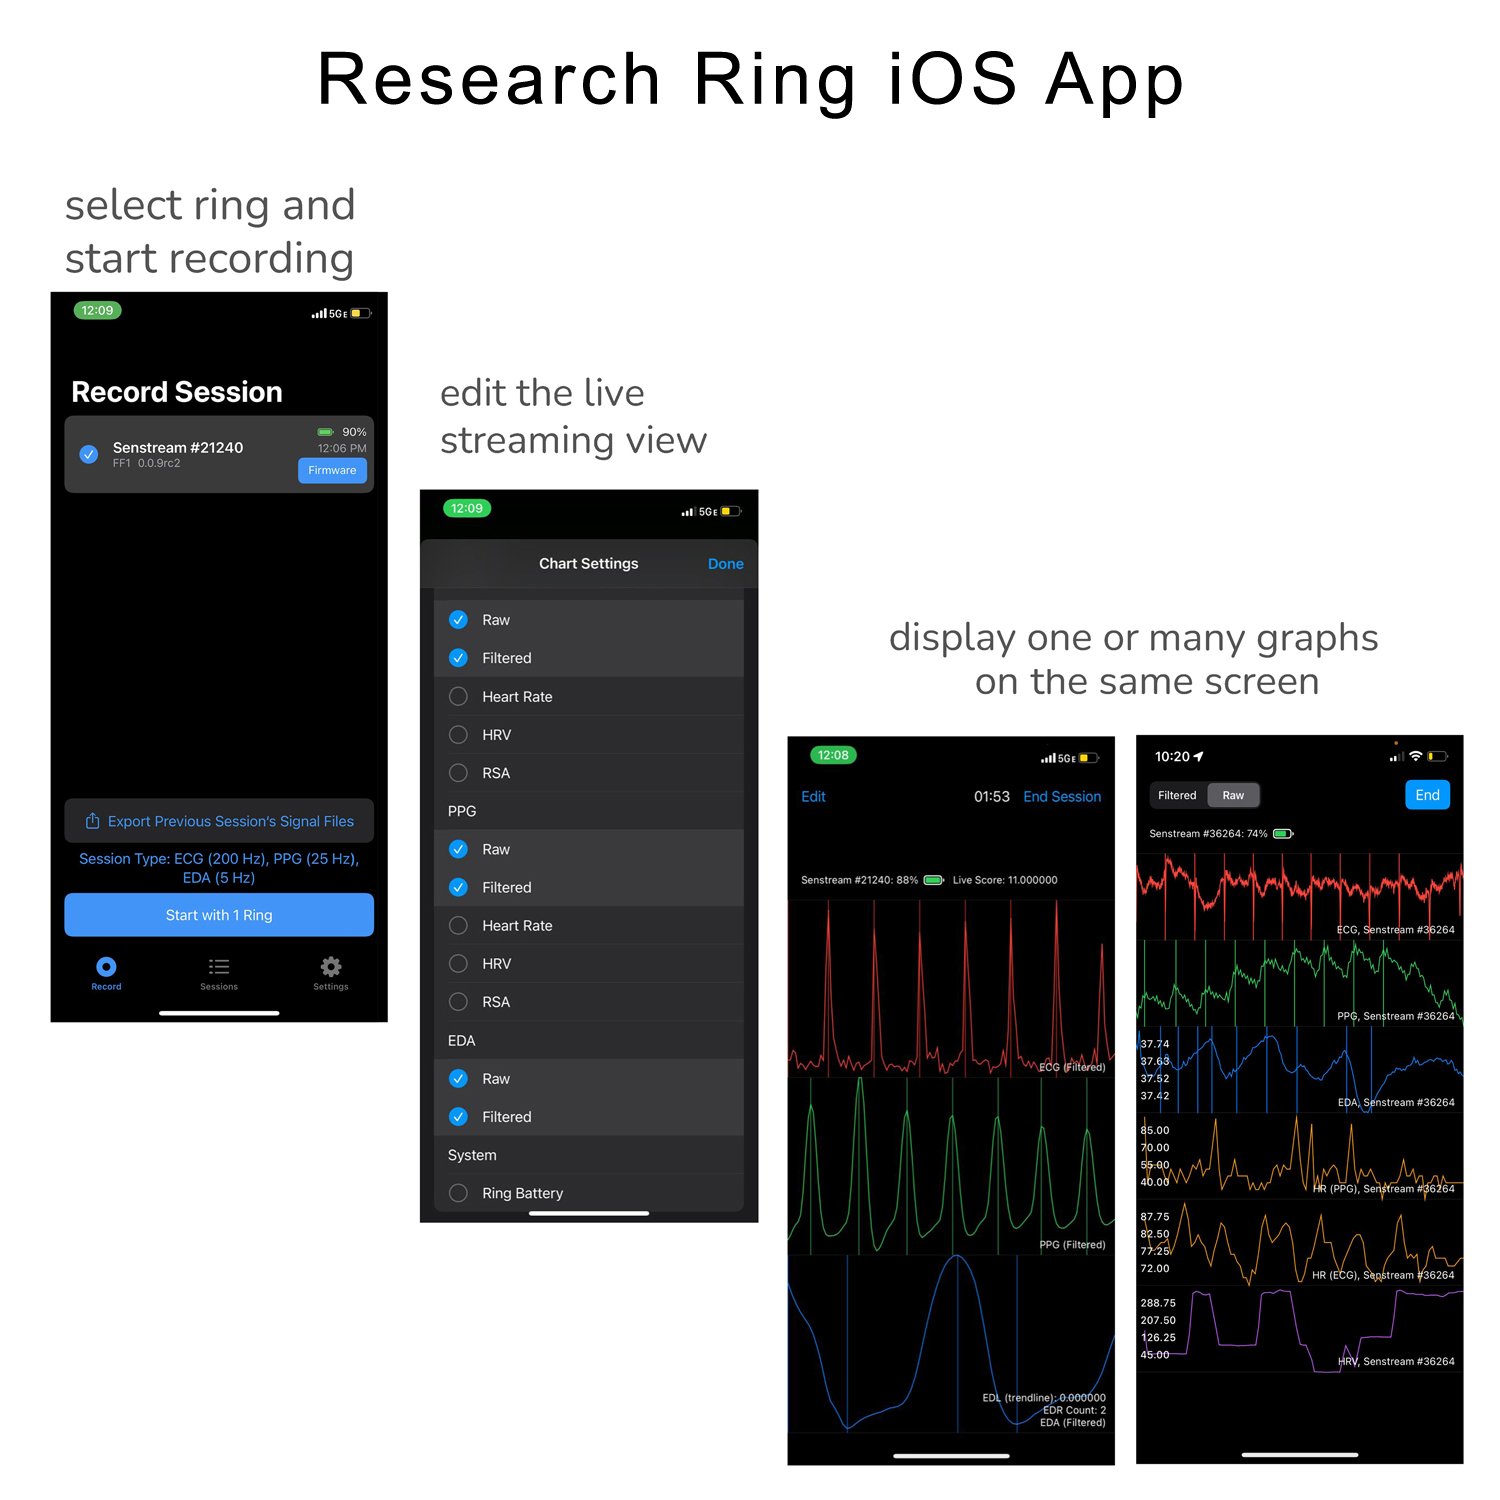 Research Ring App